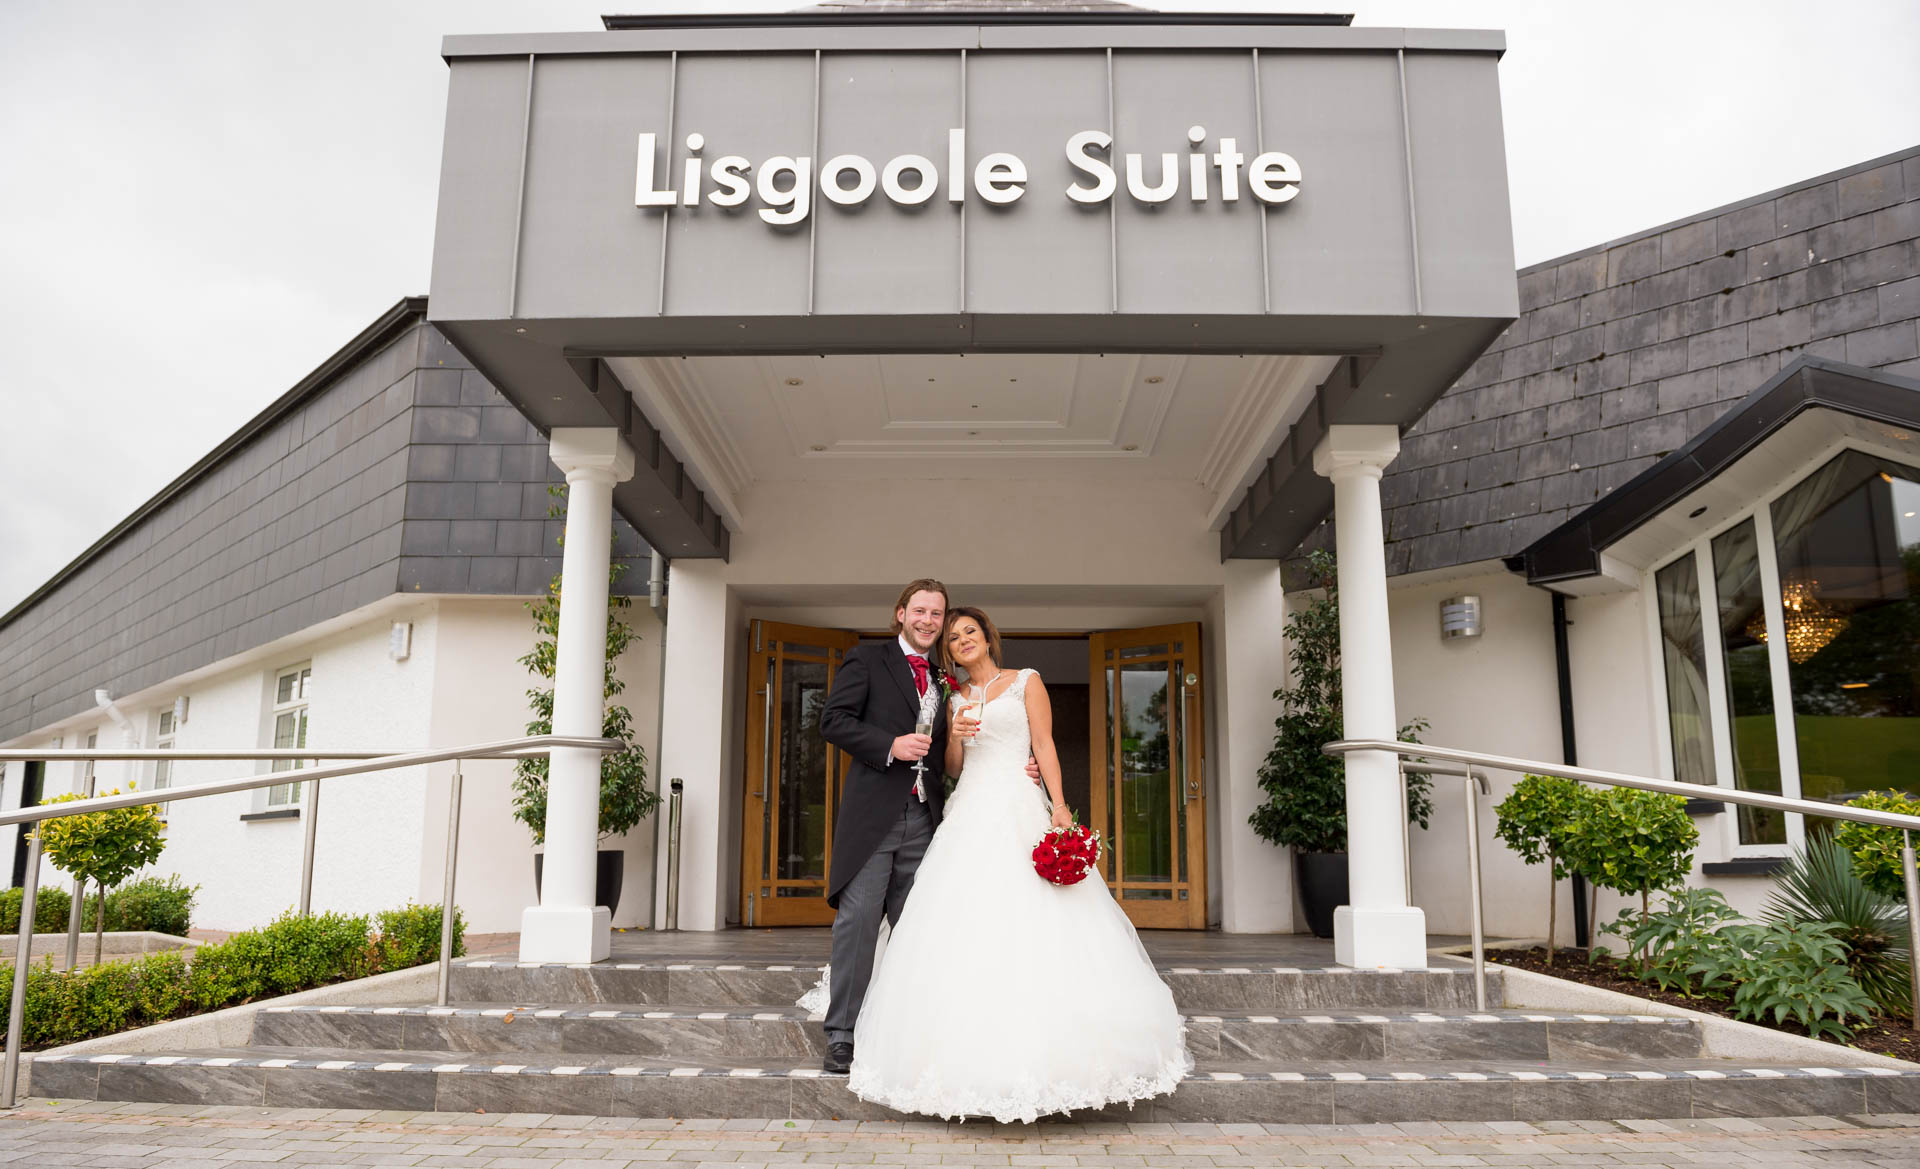 Picture of Deniz and Stevie at Killyhevlin Hotel, Enniskillen on their wedding day captured by Fermanagh, Tyrone and Northern Ireland Wedding Photographer, Trevor Lucy Photography